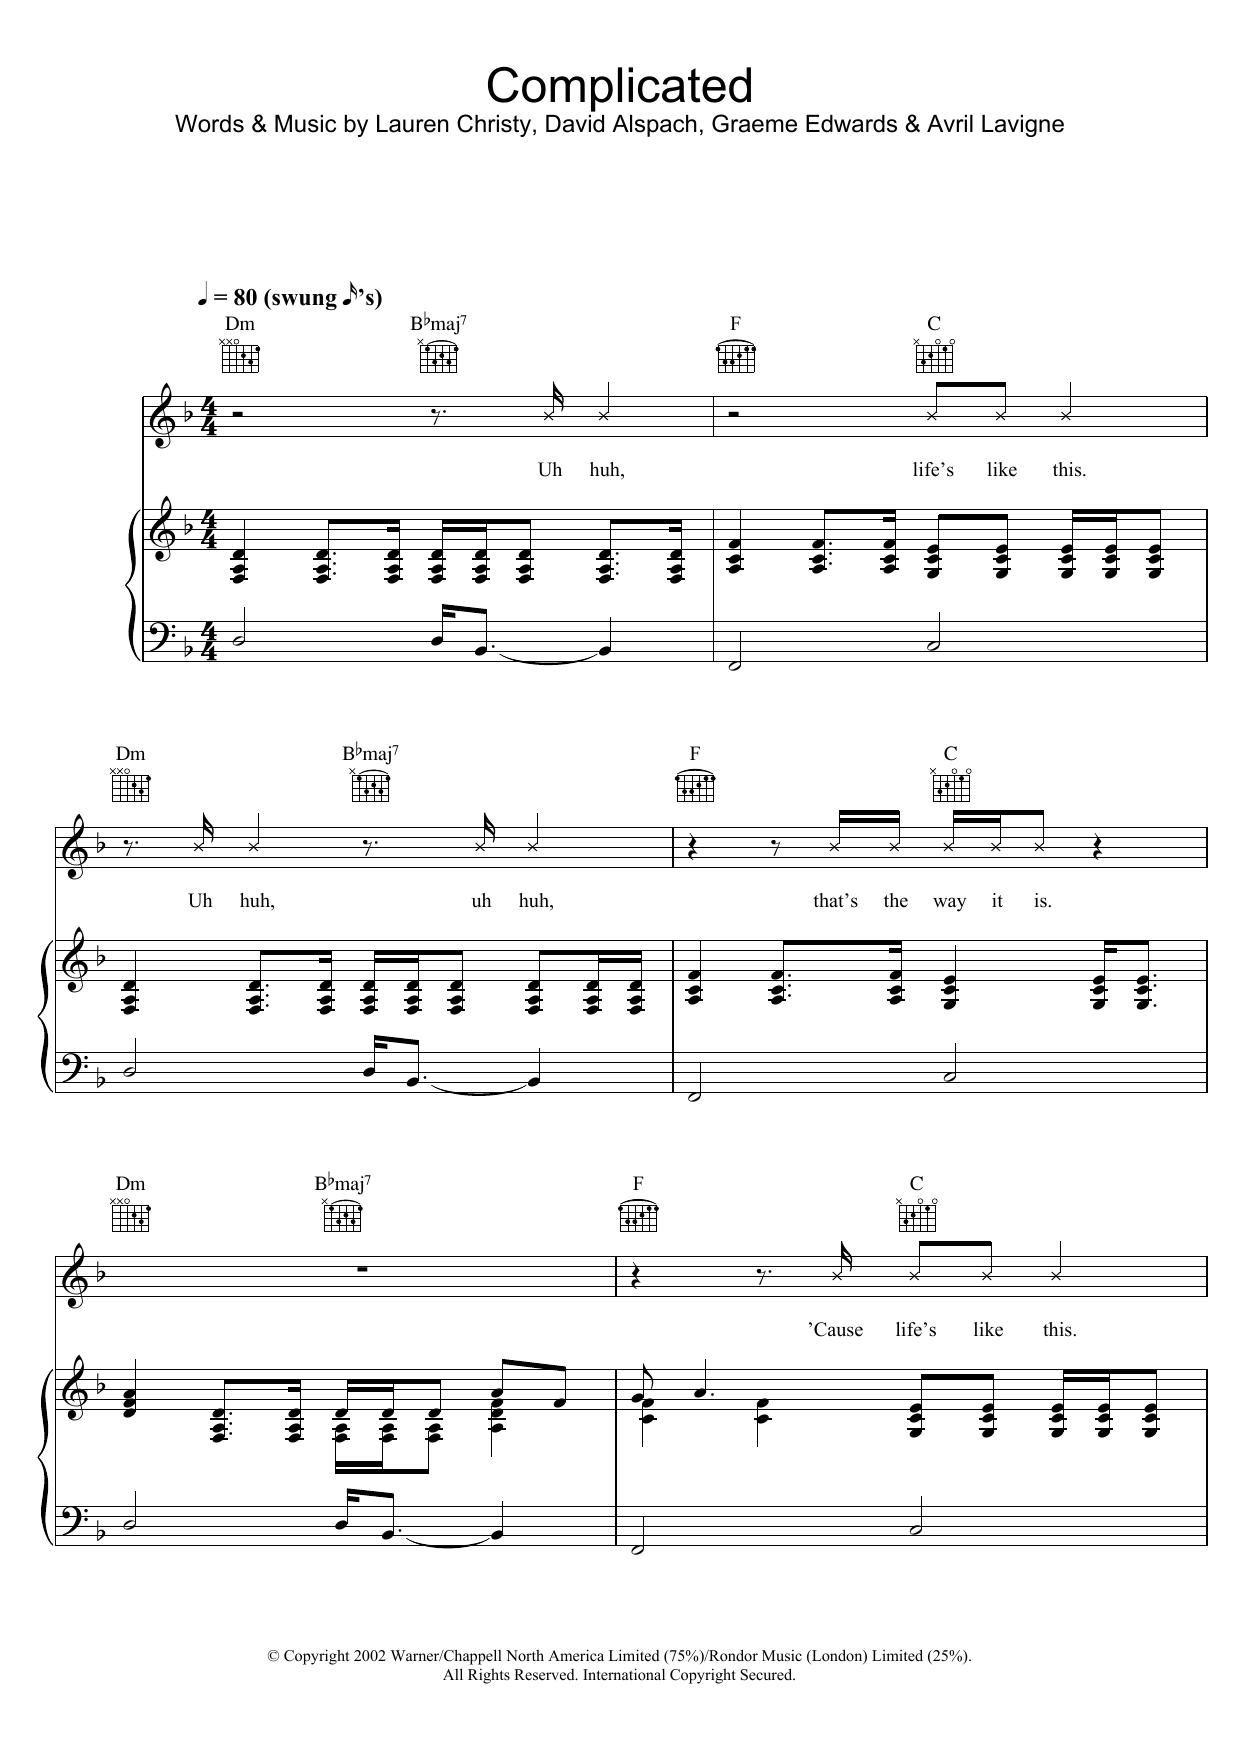 Download Avril Lavigne Complicated Sheet Music